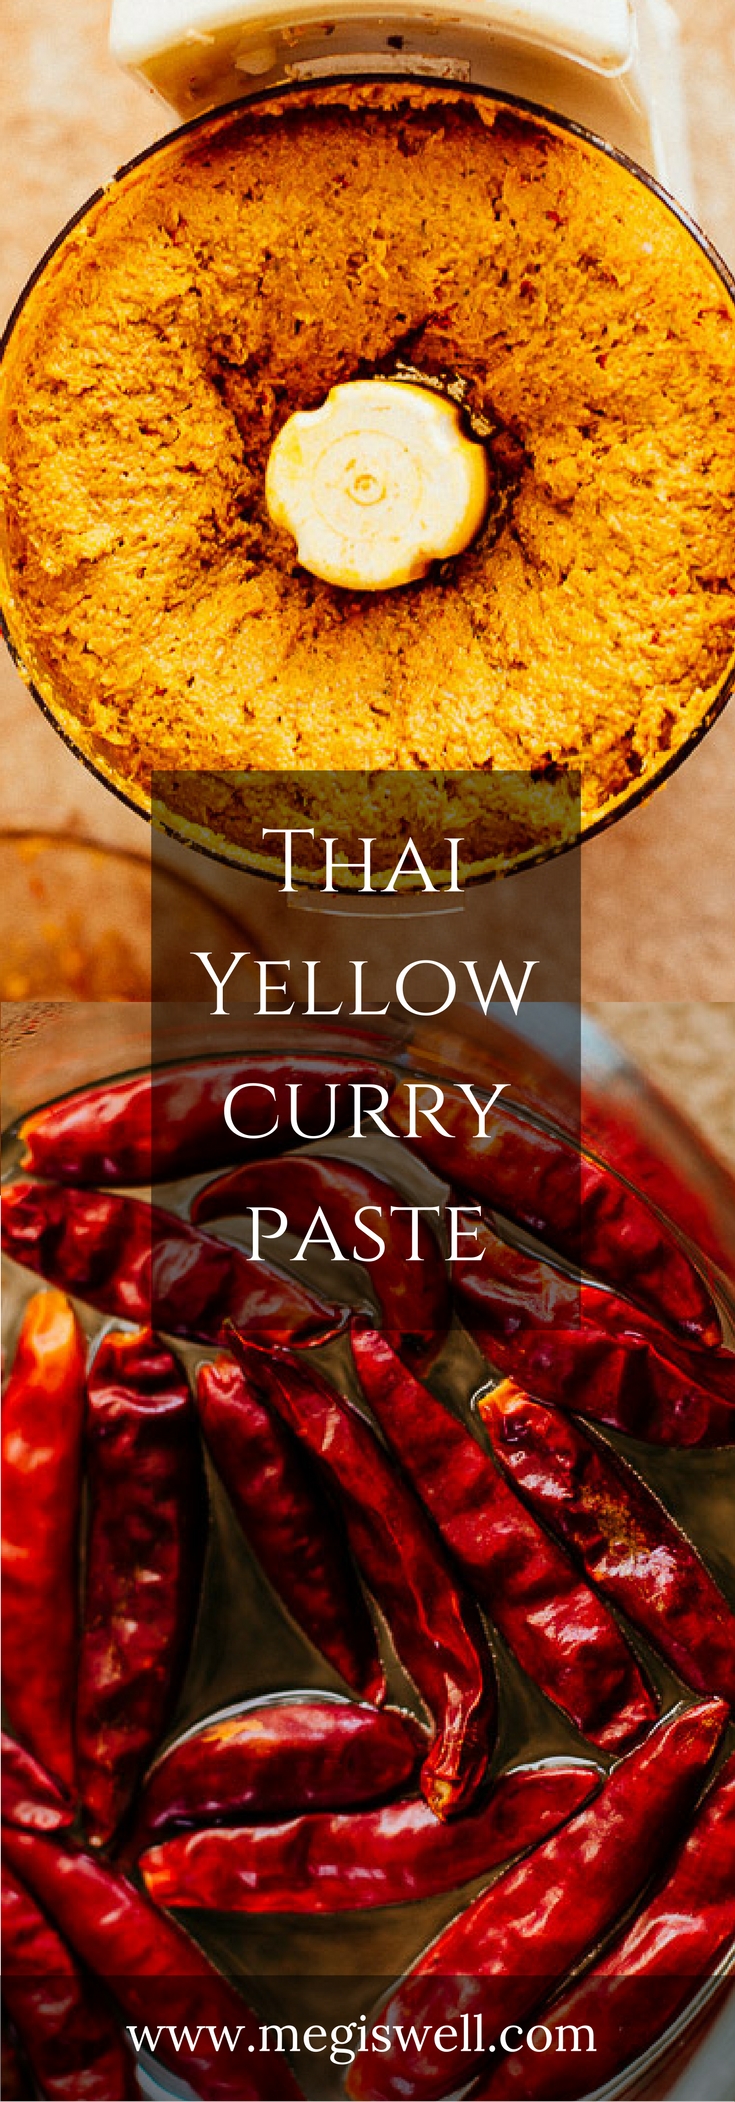 Although making your own Thai Yellow Curry Paste from scratch seems intimidating, this recipe breaks it down into manageable steps. You'll never have to buy store bought curry paste again and the effort is well worth the rewards. | www.megiswell.com